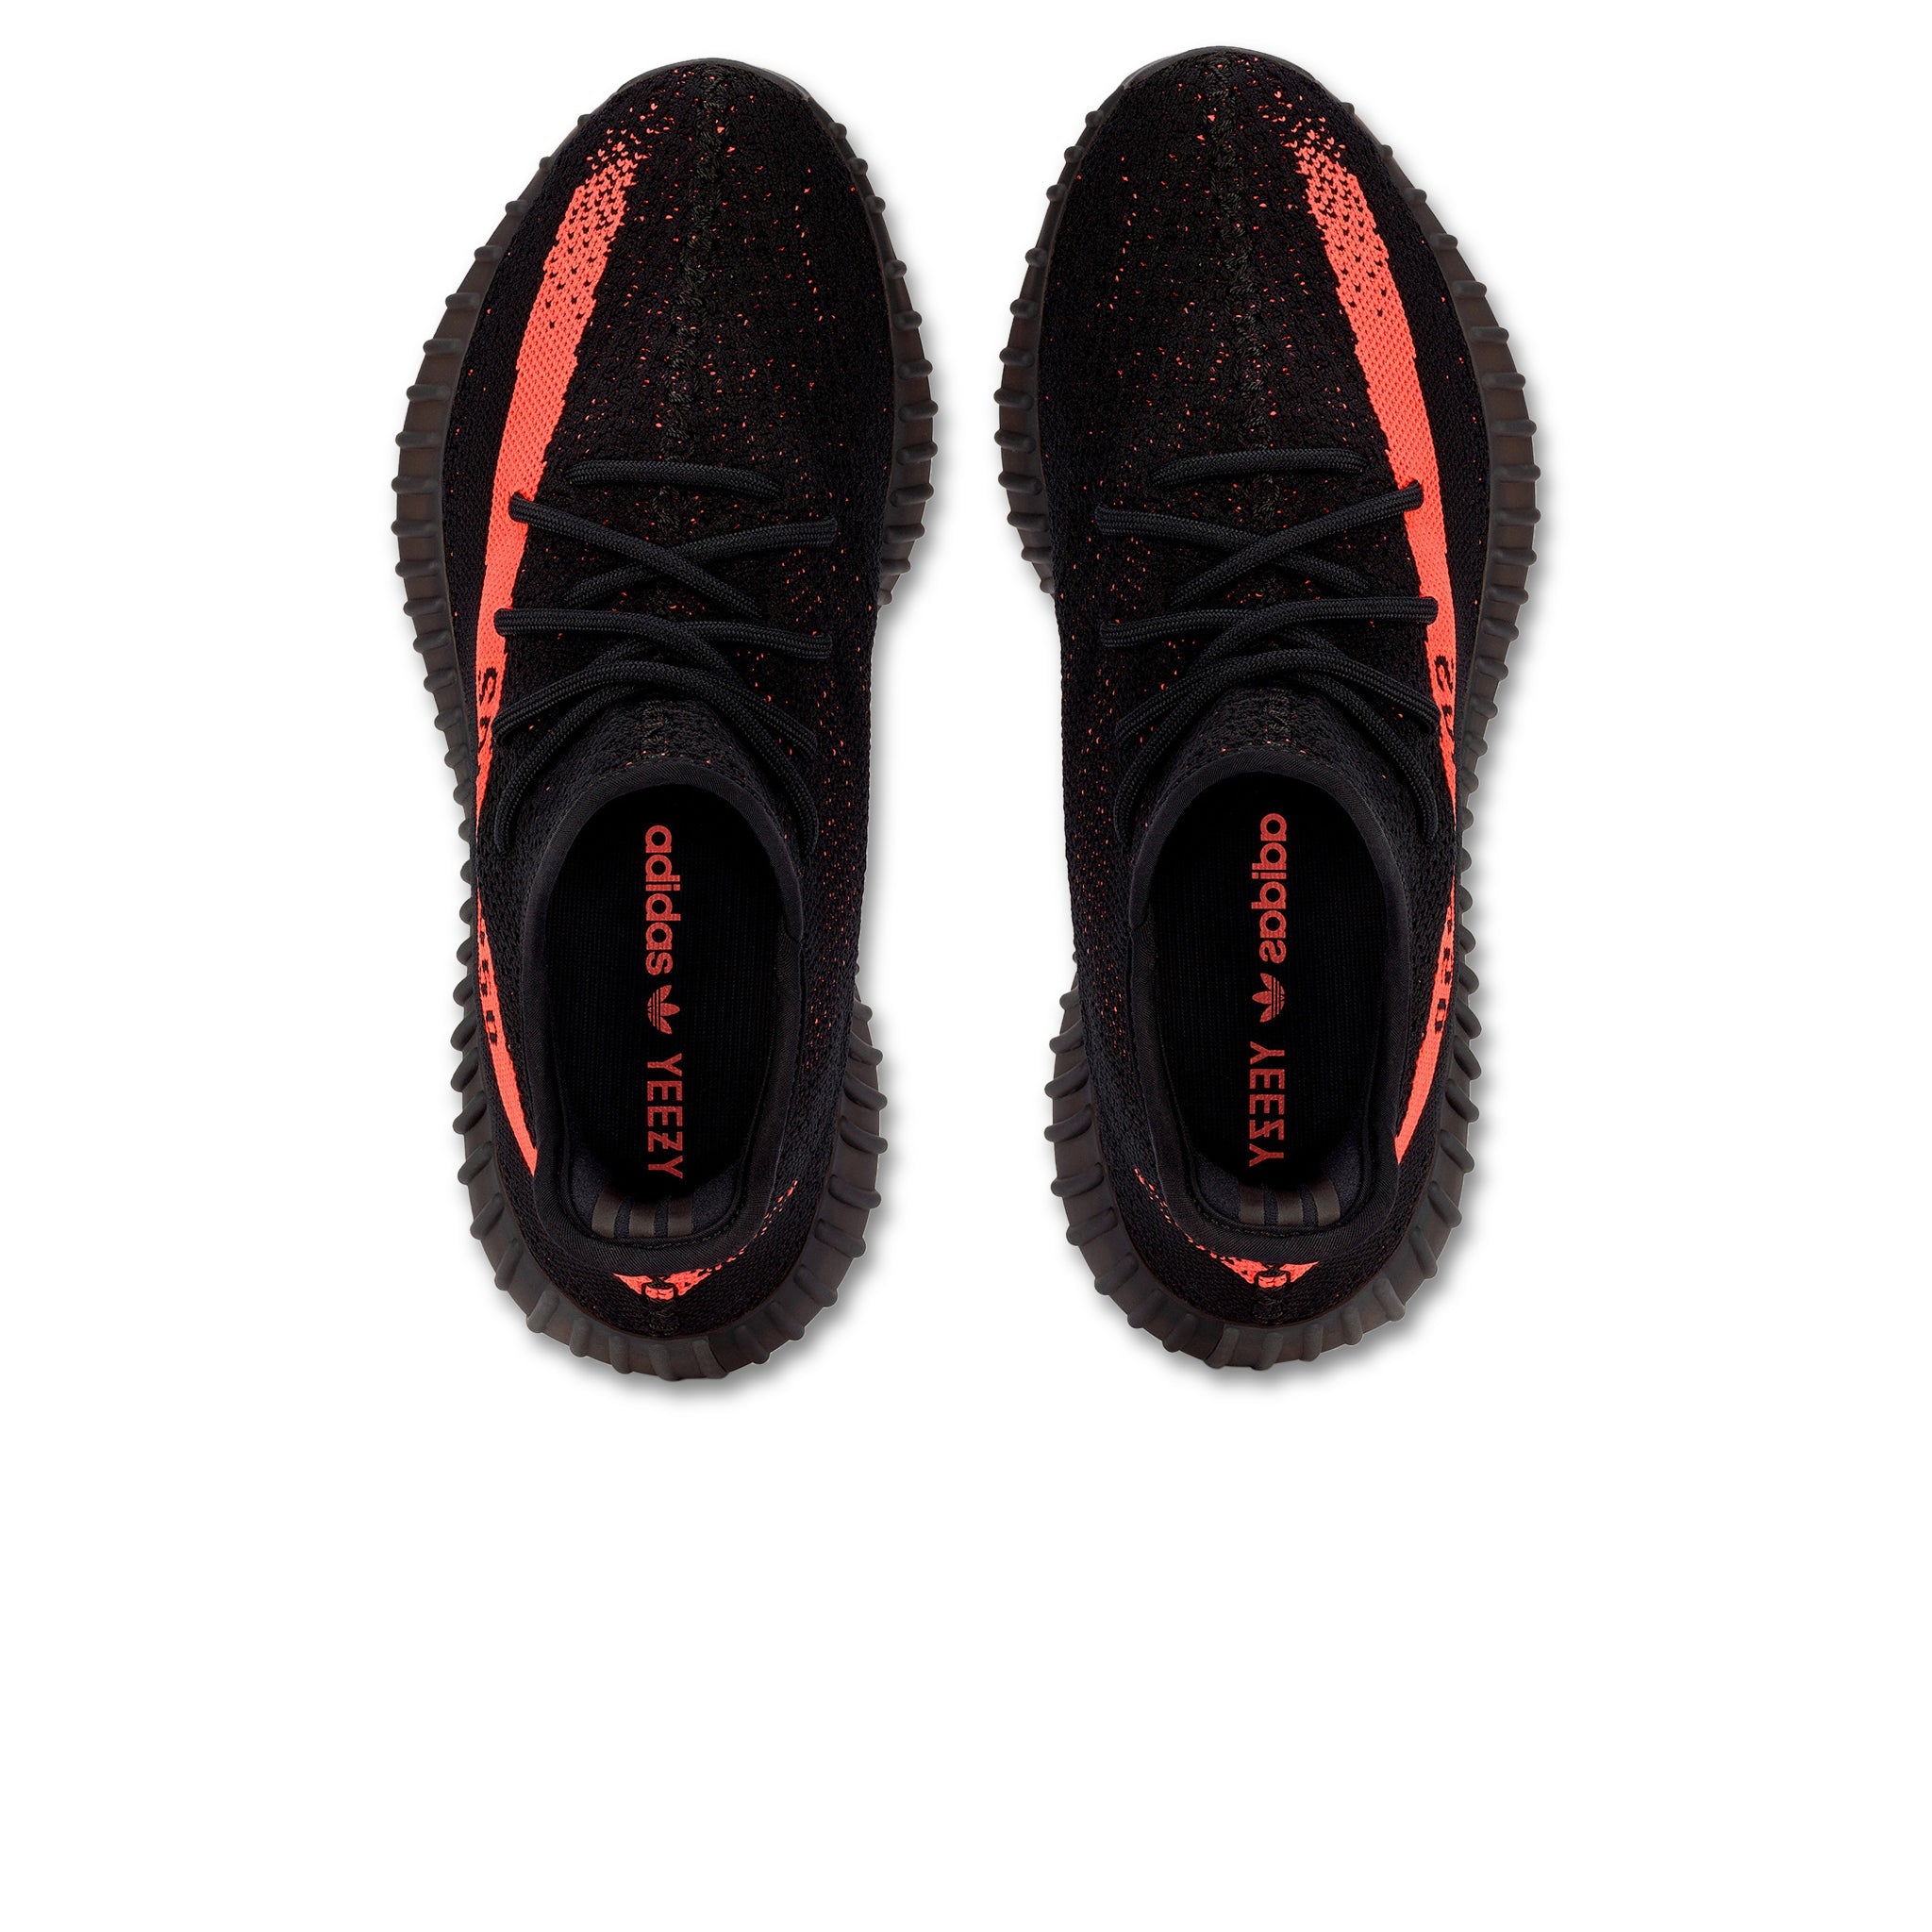 Adidas Yeezy 350 V2 Boost 'Core Red' 